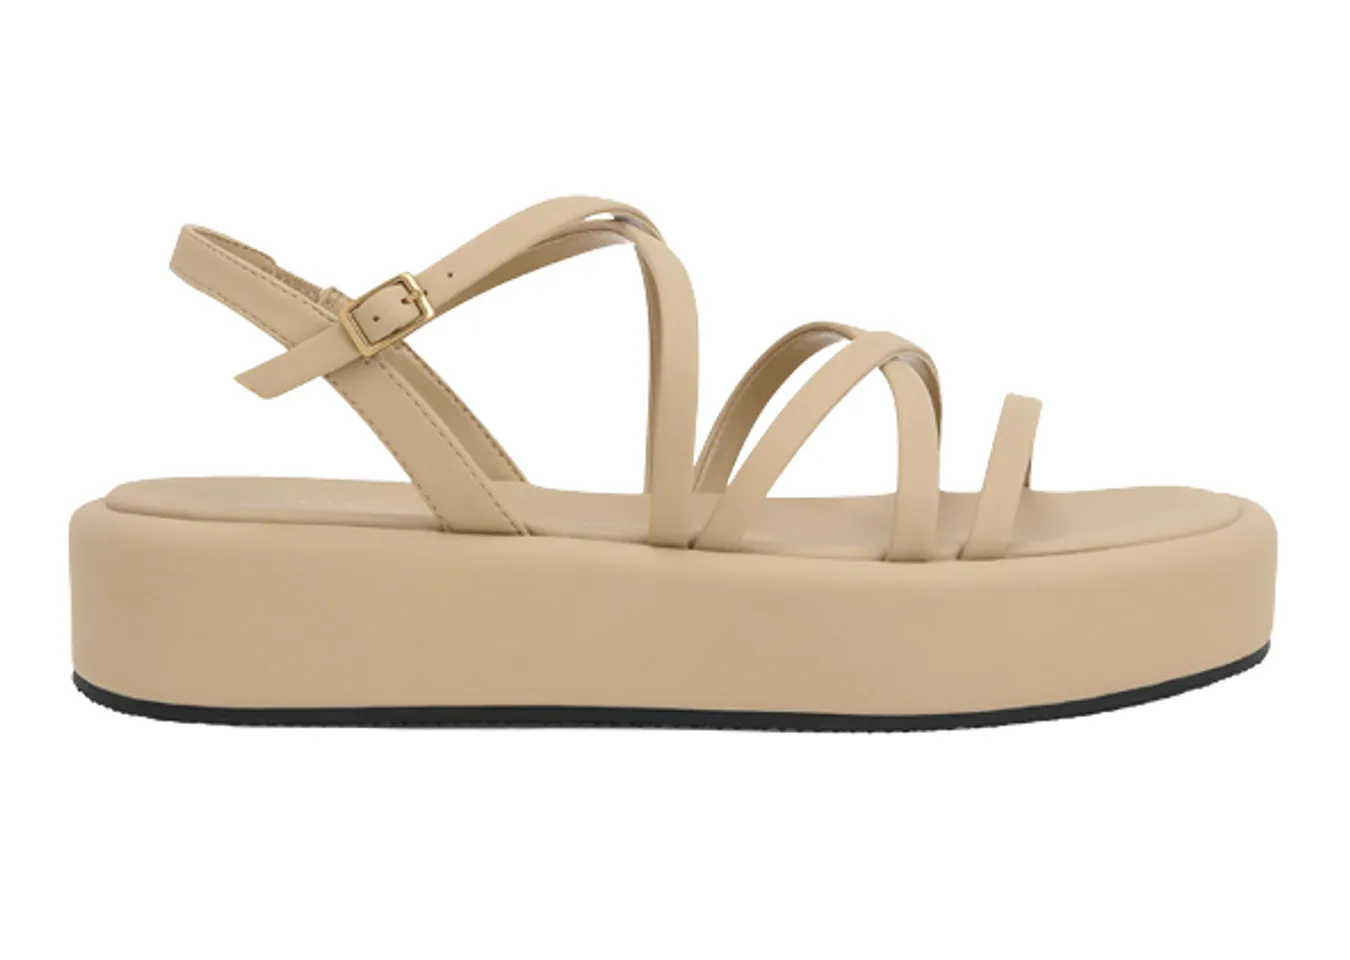 Dép sandal Charles & Keith Strappy Padded Flatforms CK1-80380069 Sand, 35